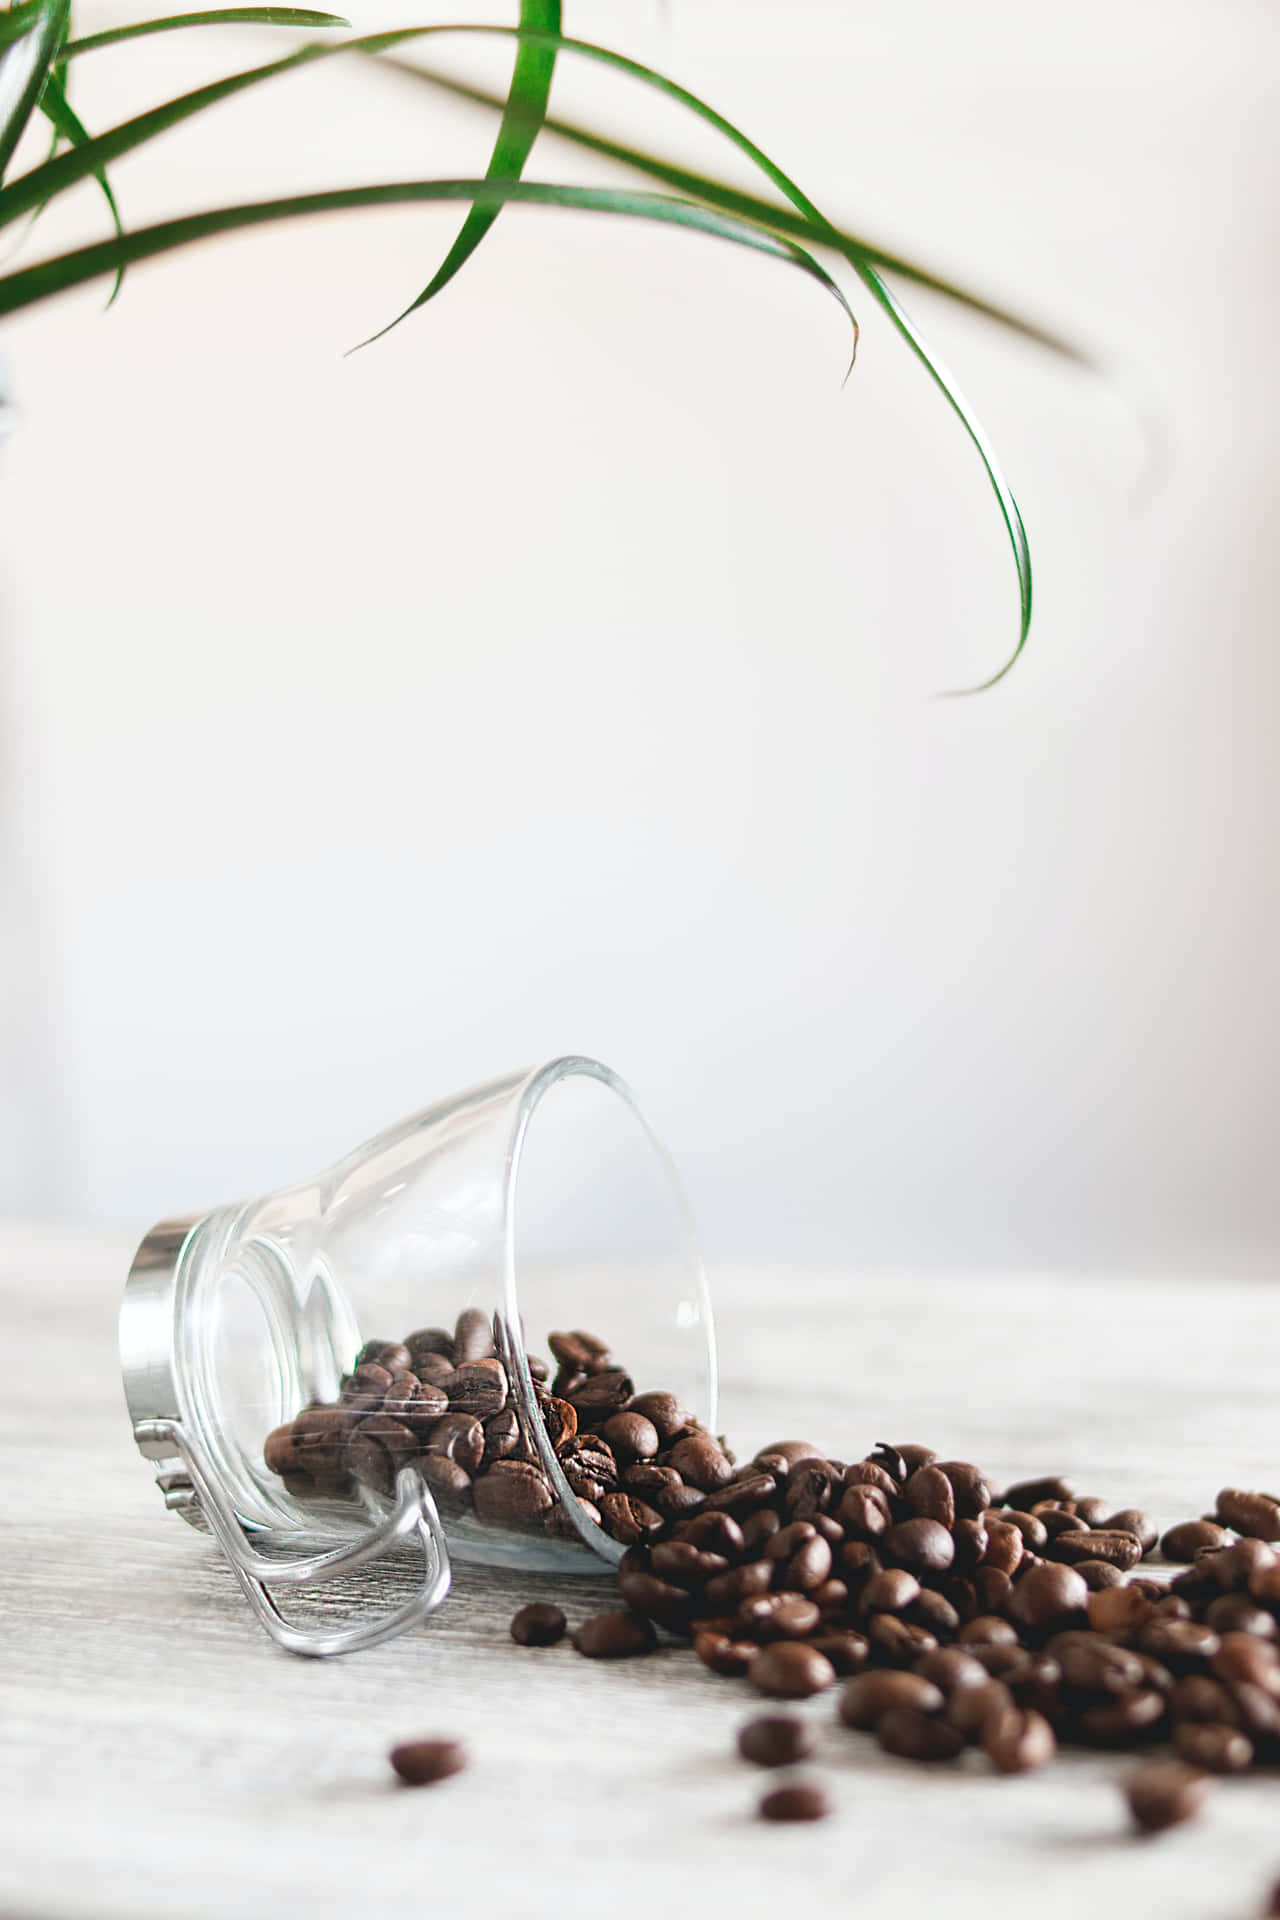 Aesthetic Close-up Photograph Of Freshly Brewed Coffee